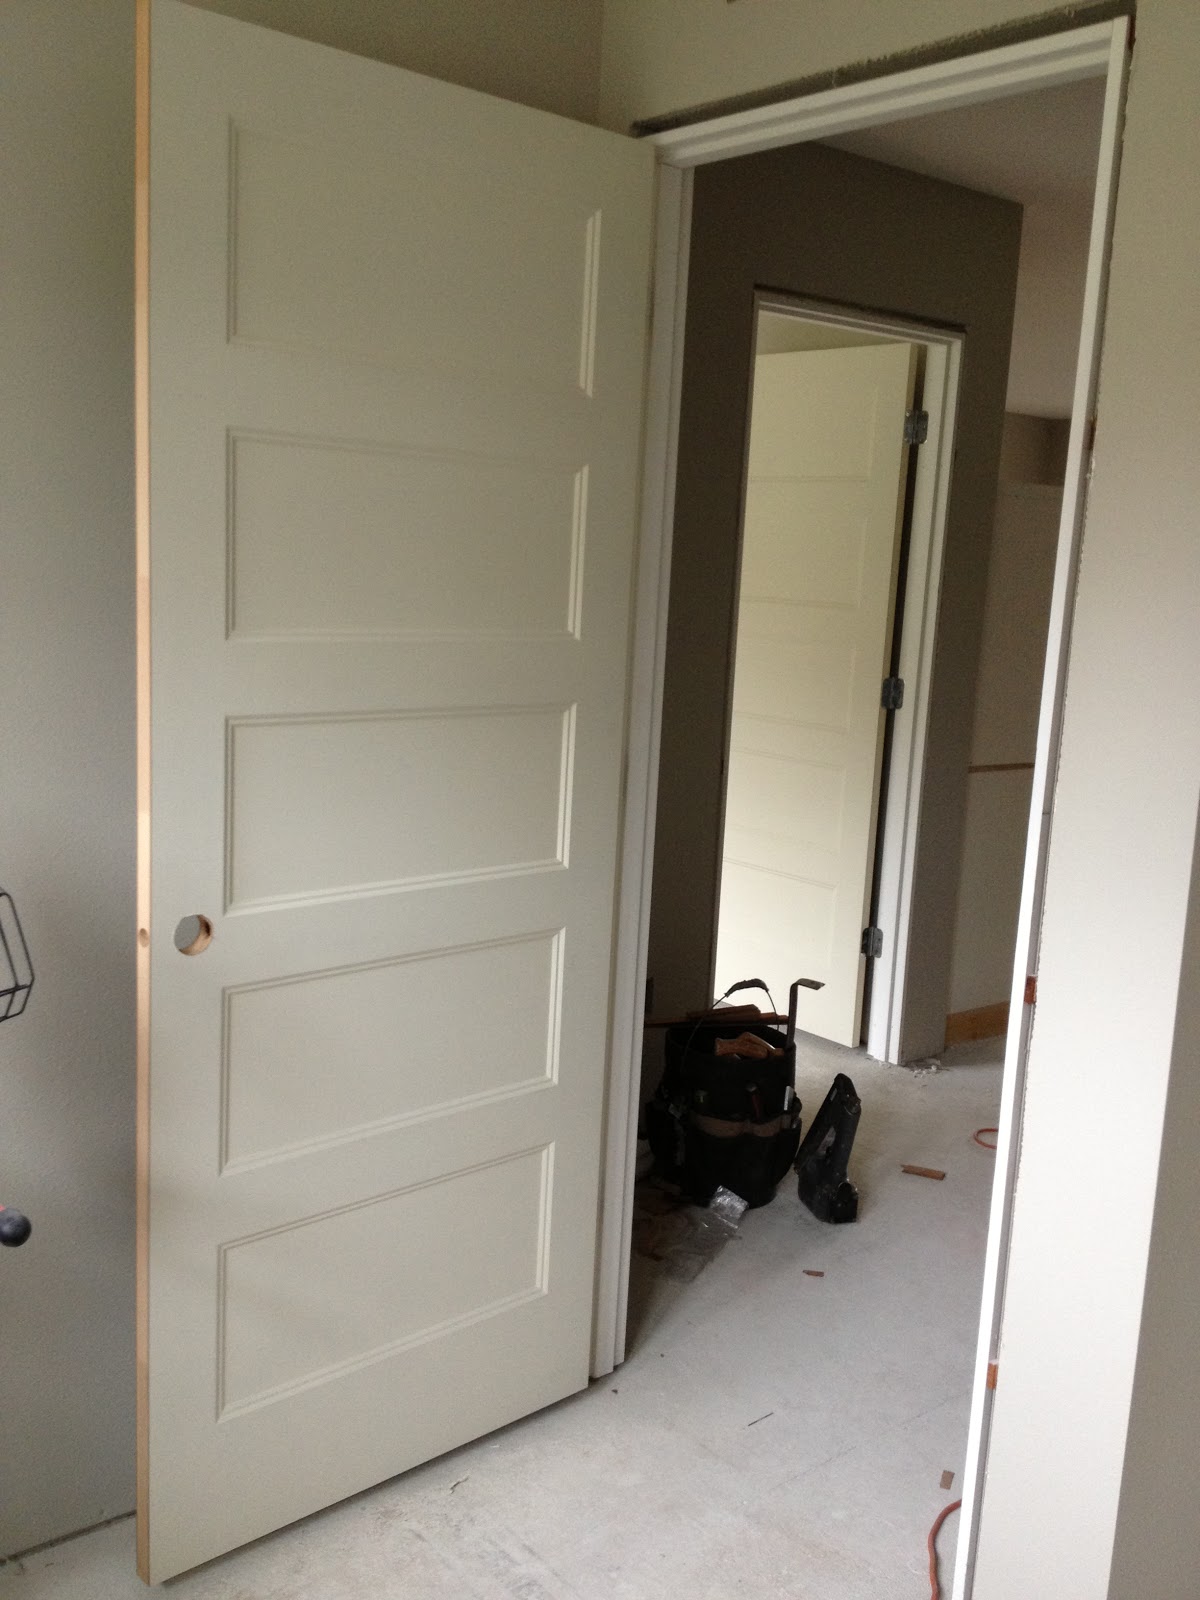 Building our dream home, from the ground up Progress photos millwork & doors